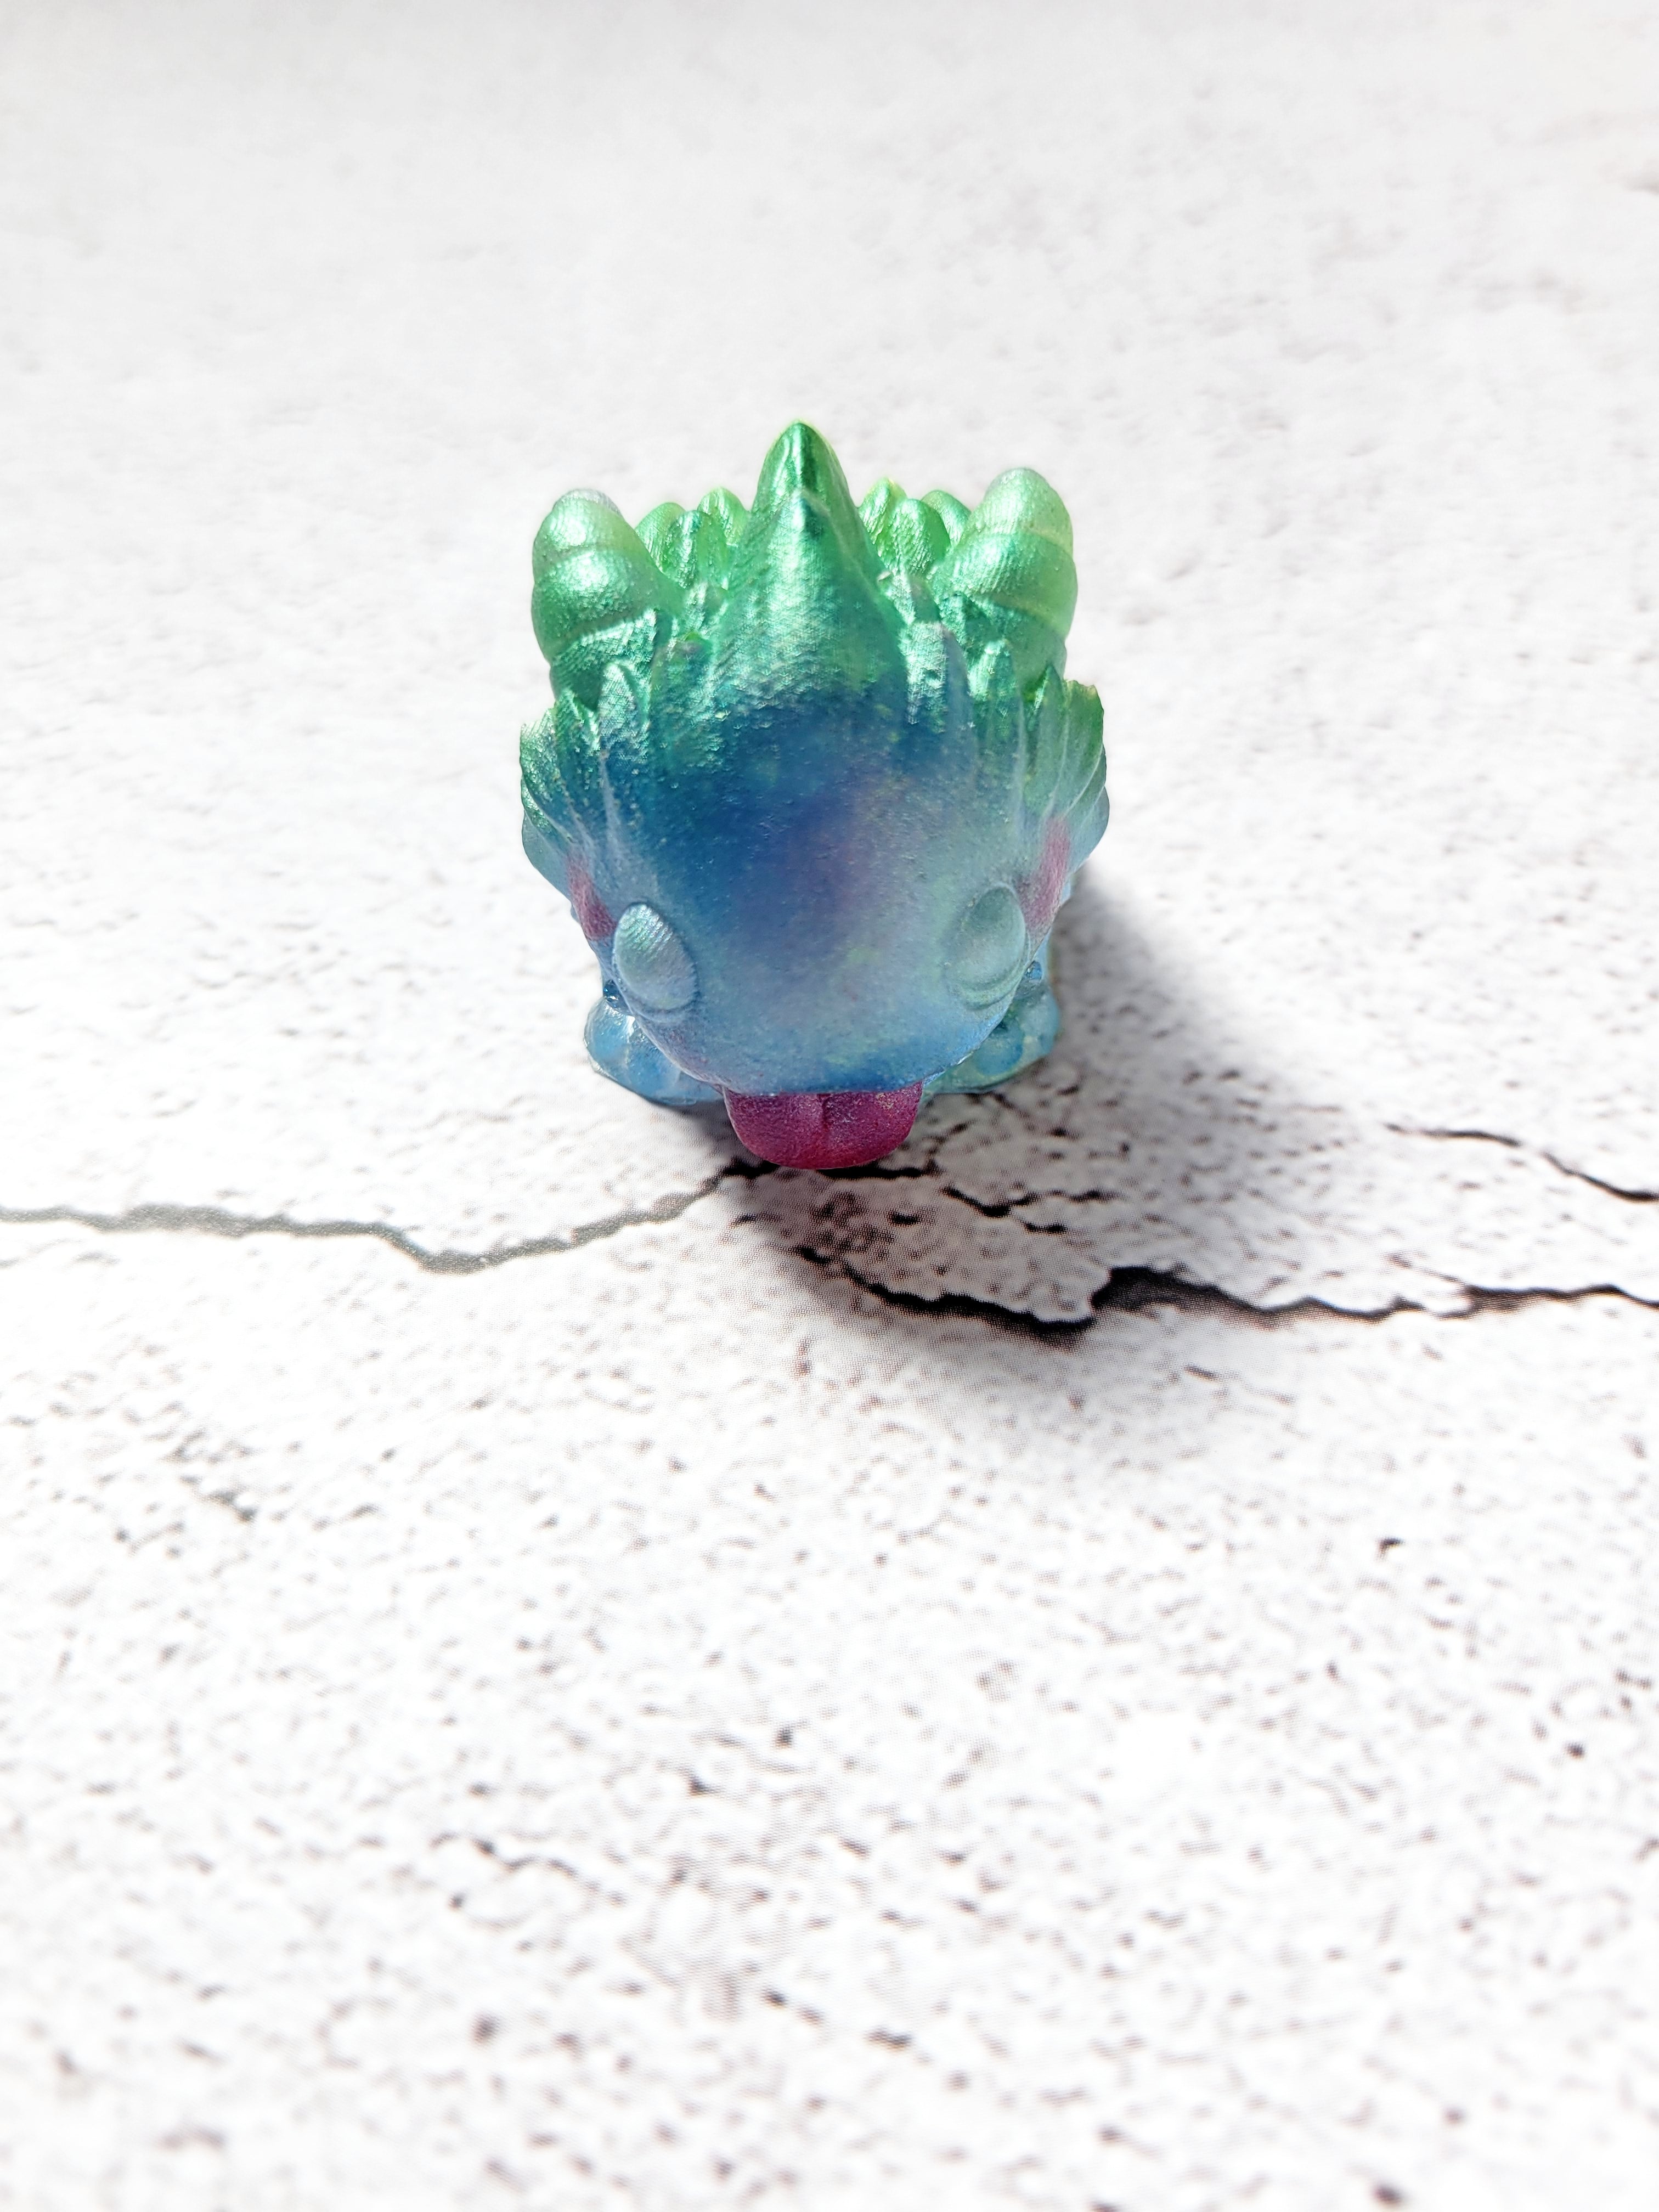 A front view of a spiked monster figure. The body is blue, spikes green, tongue red with red cheeks.